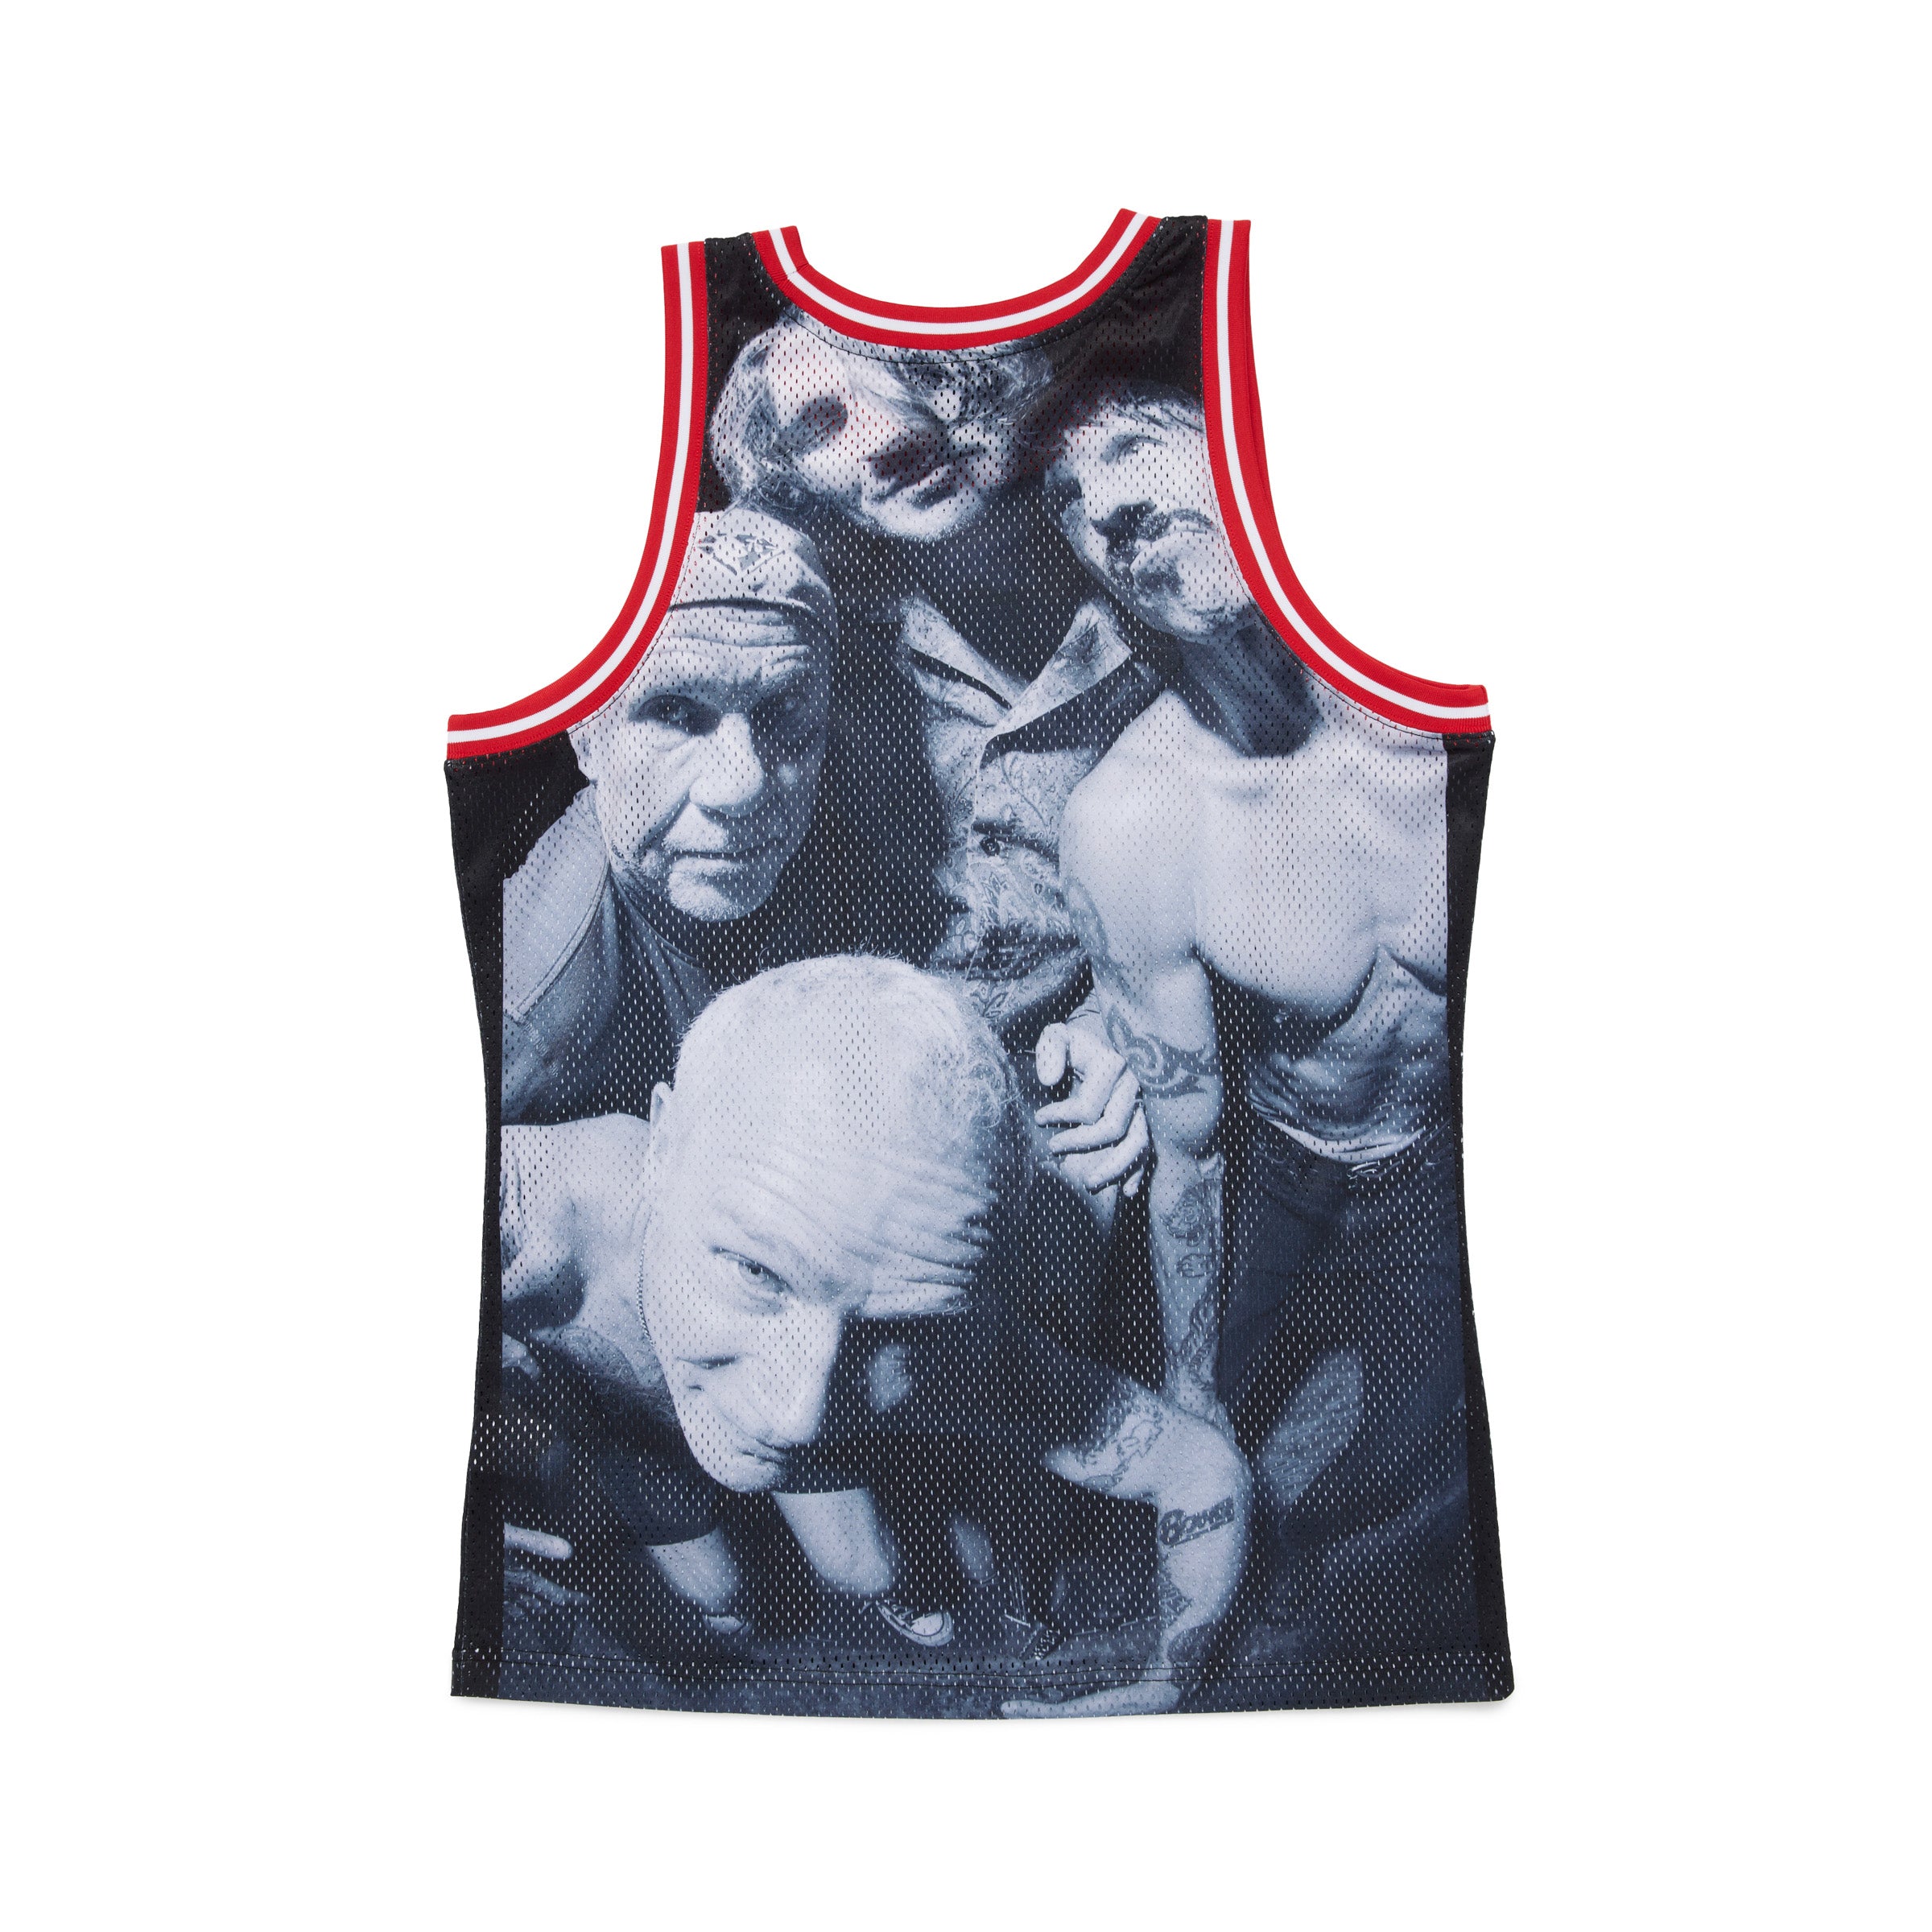 Red Hot Chili Peppers Official Online Store